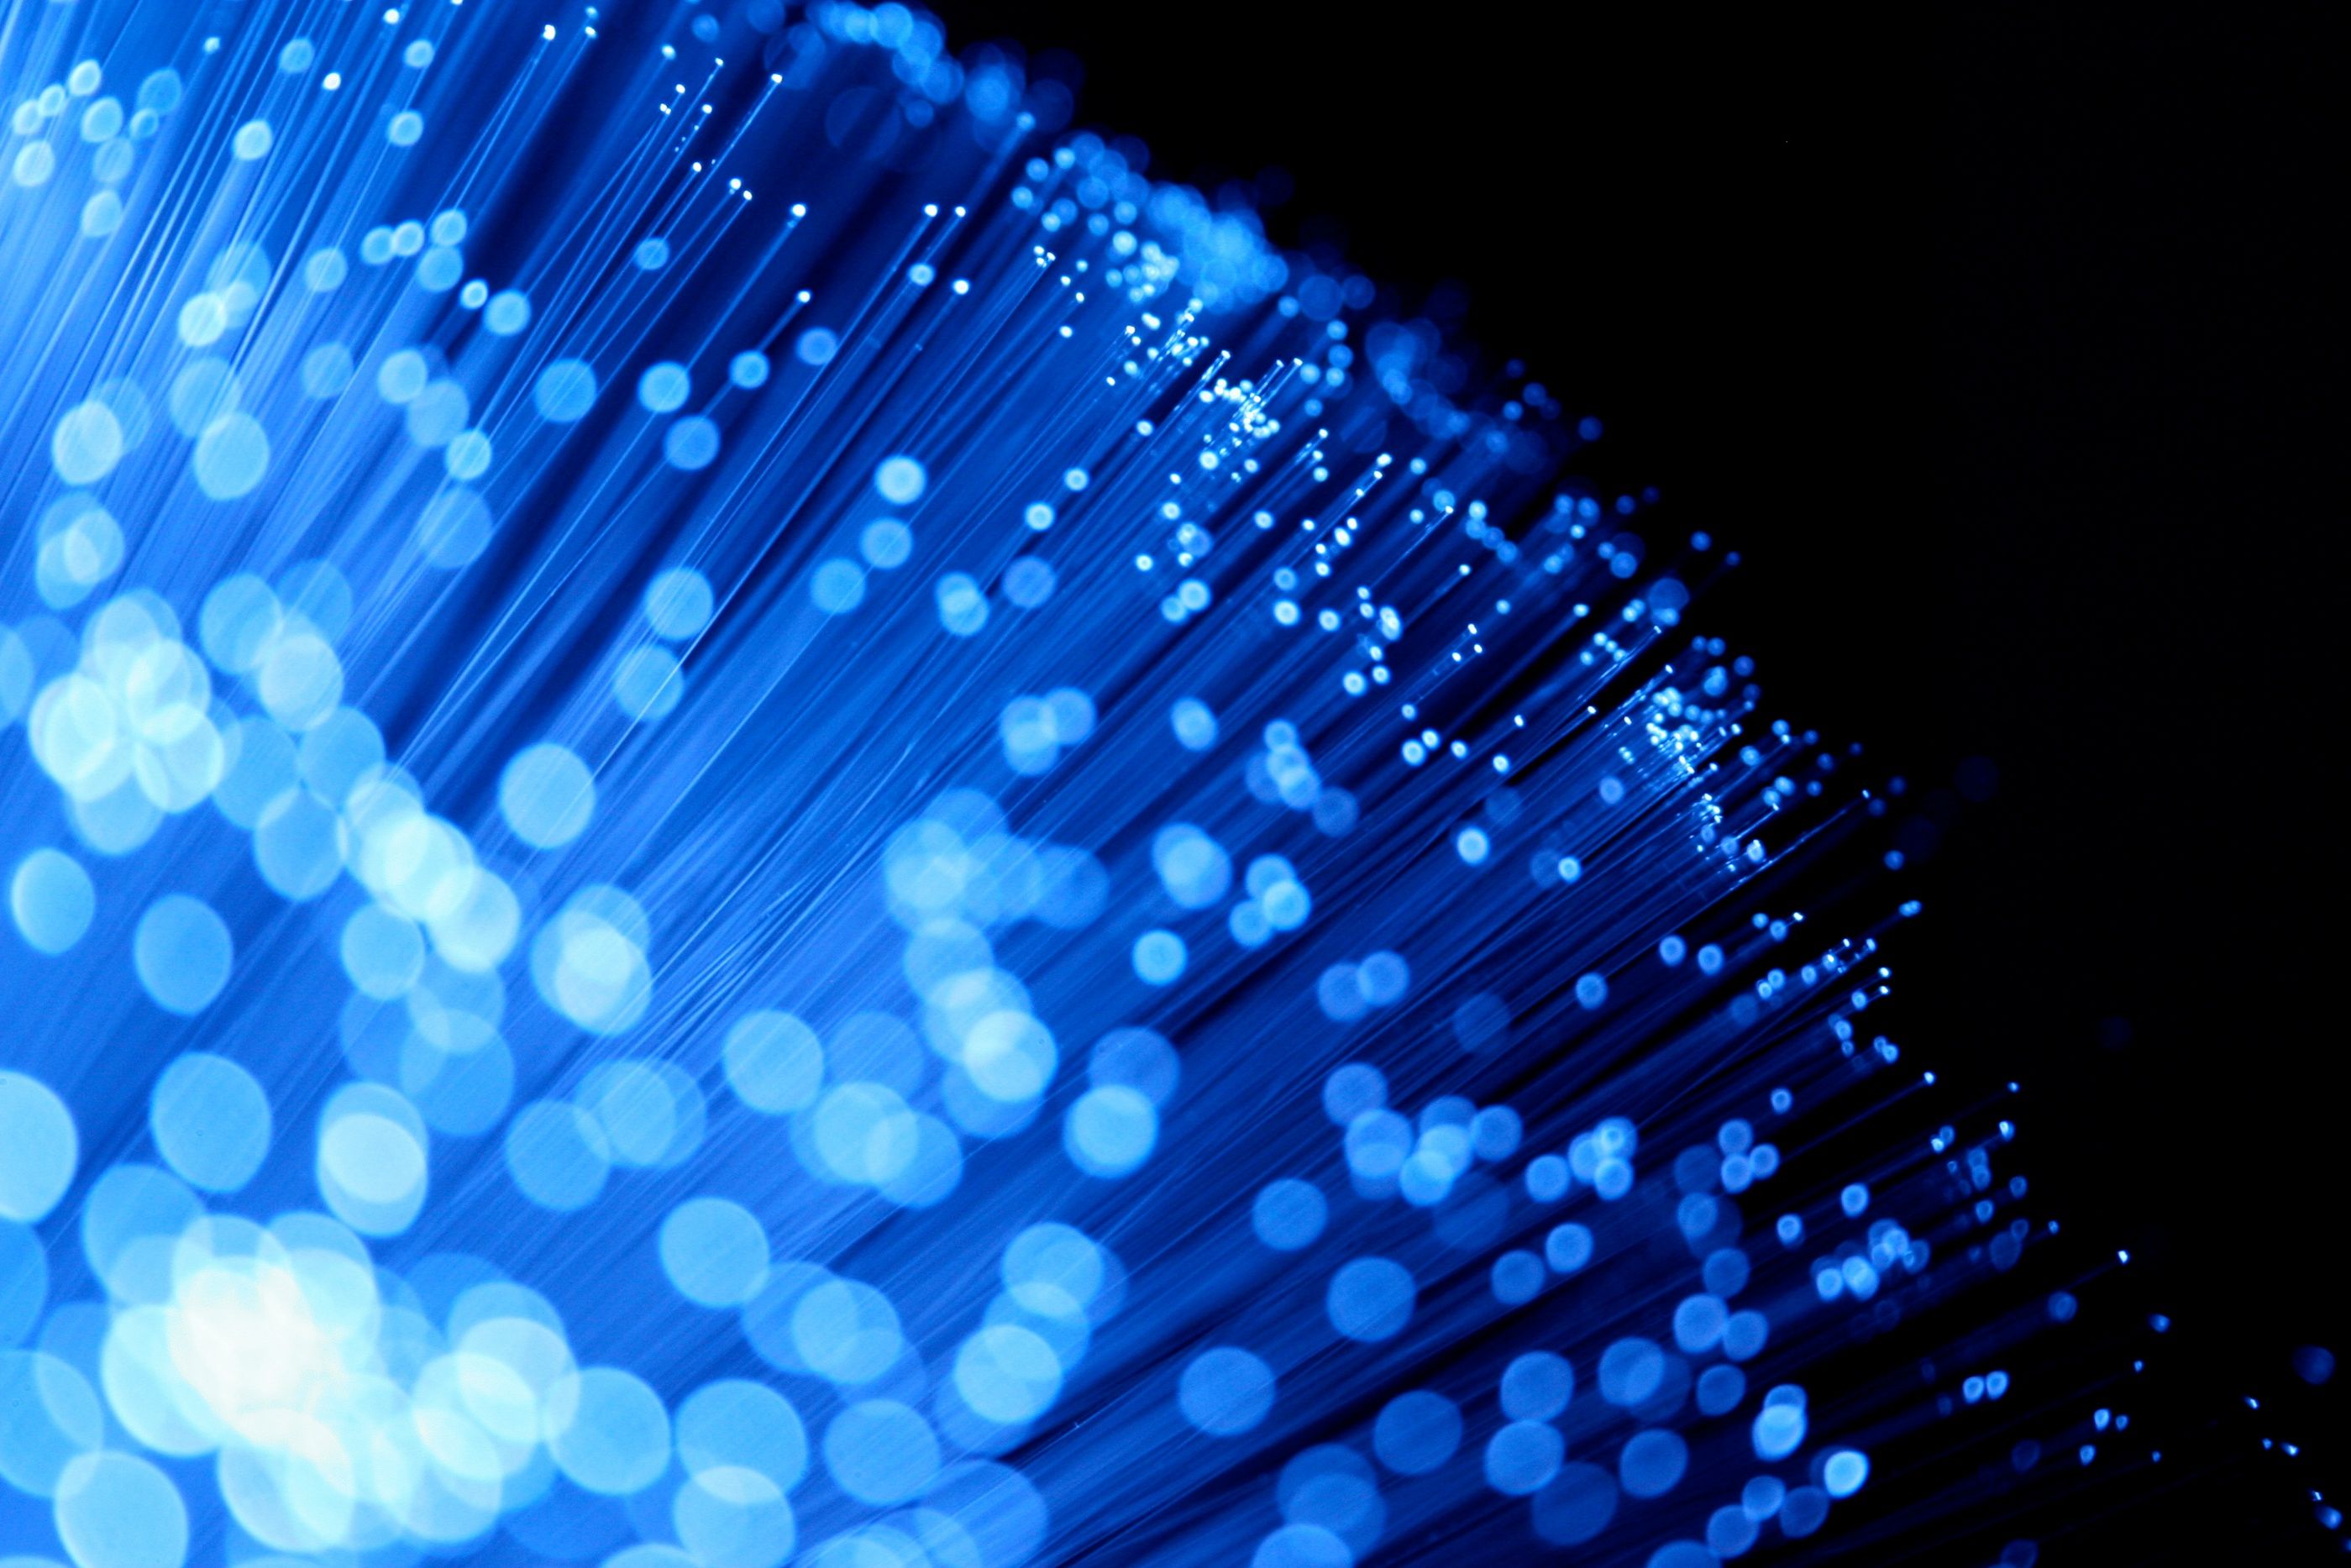 Fibre optic products are great! | Technology | Pinterest | Fiber optic